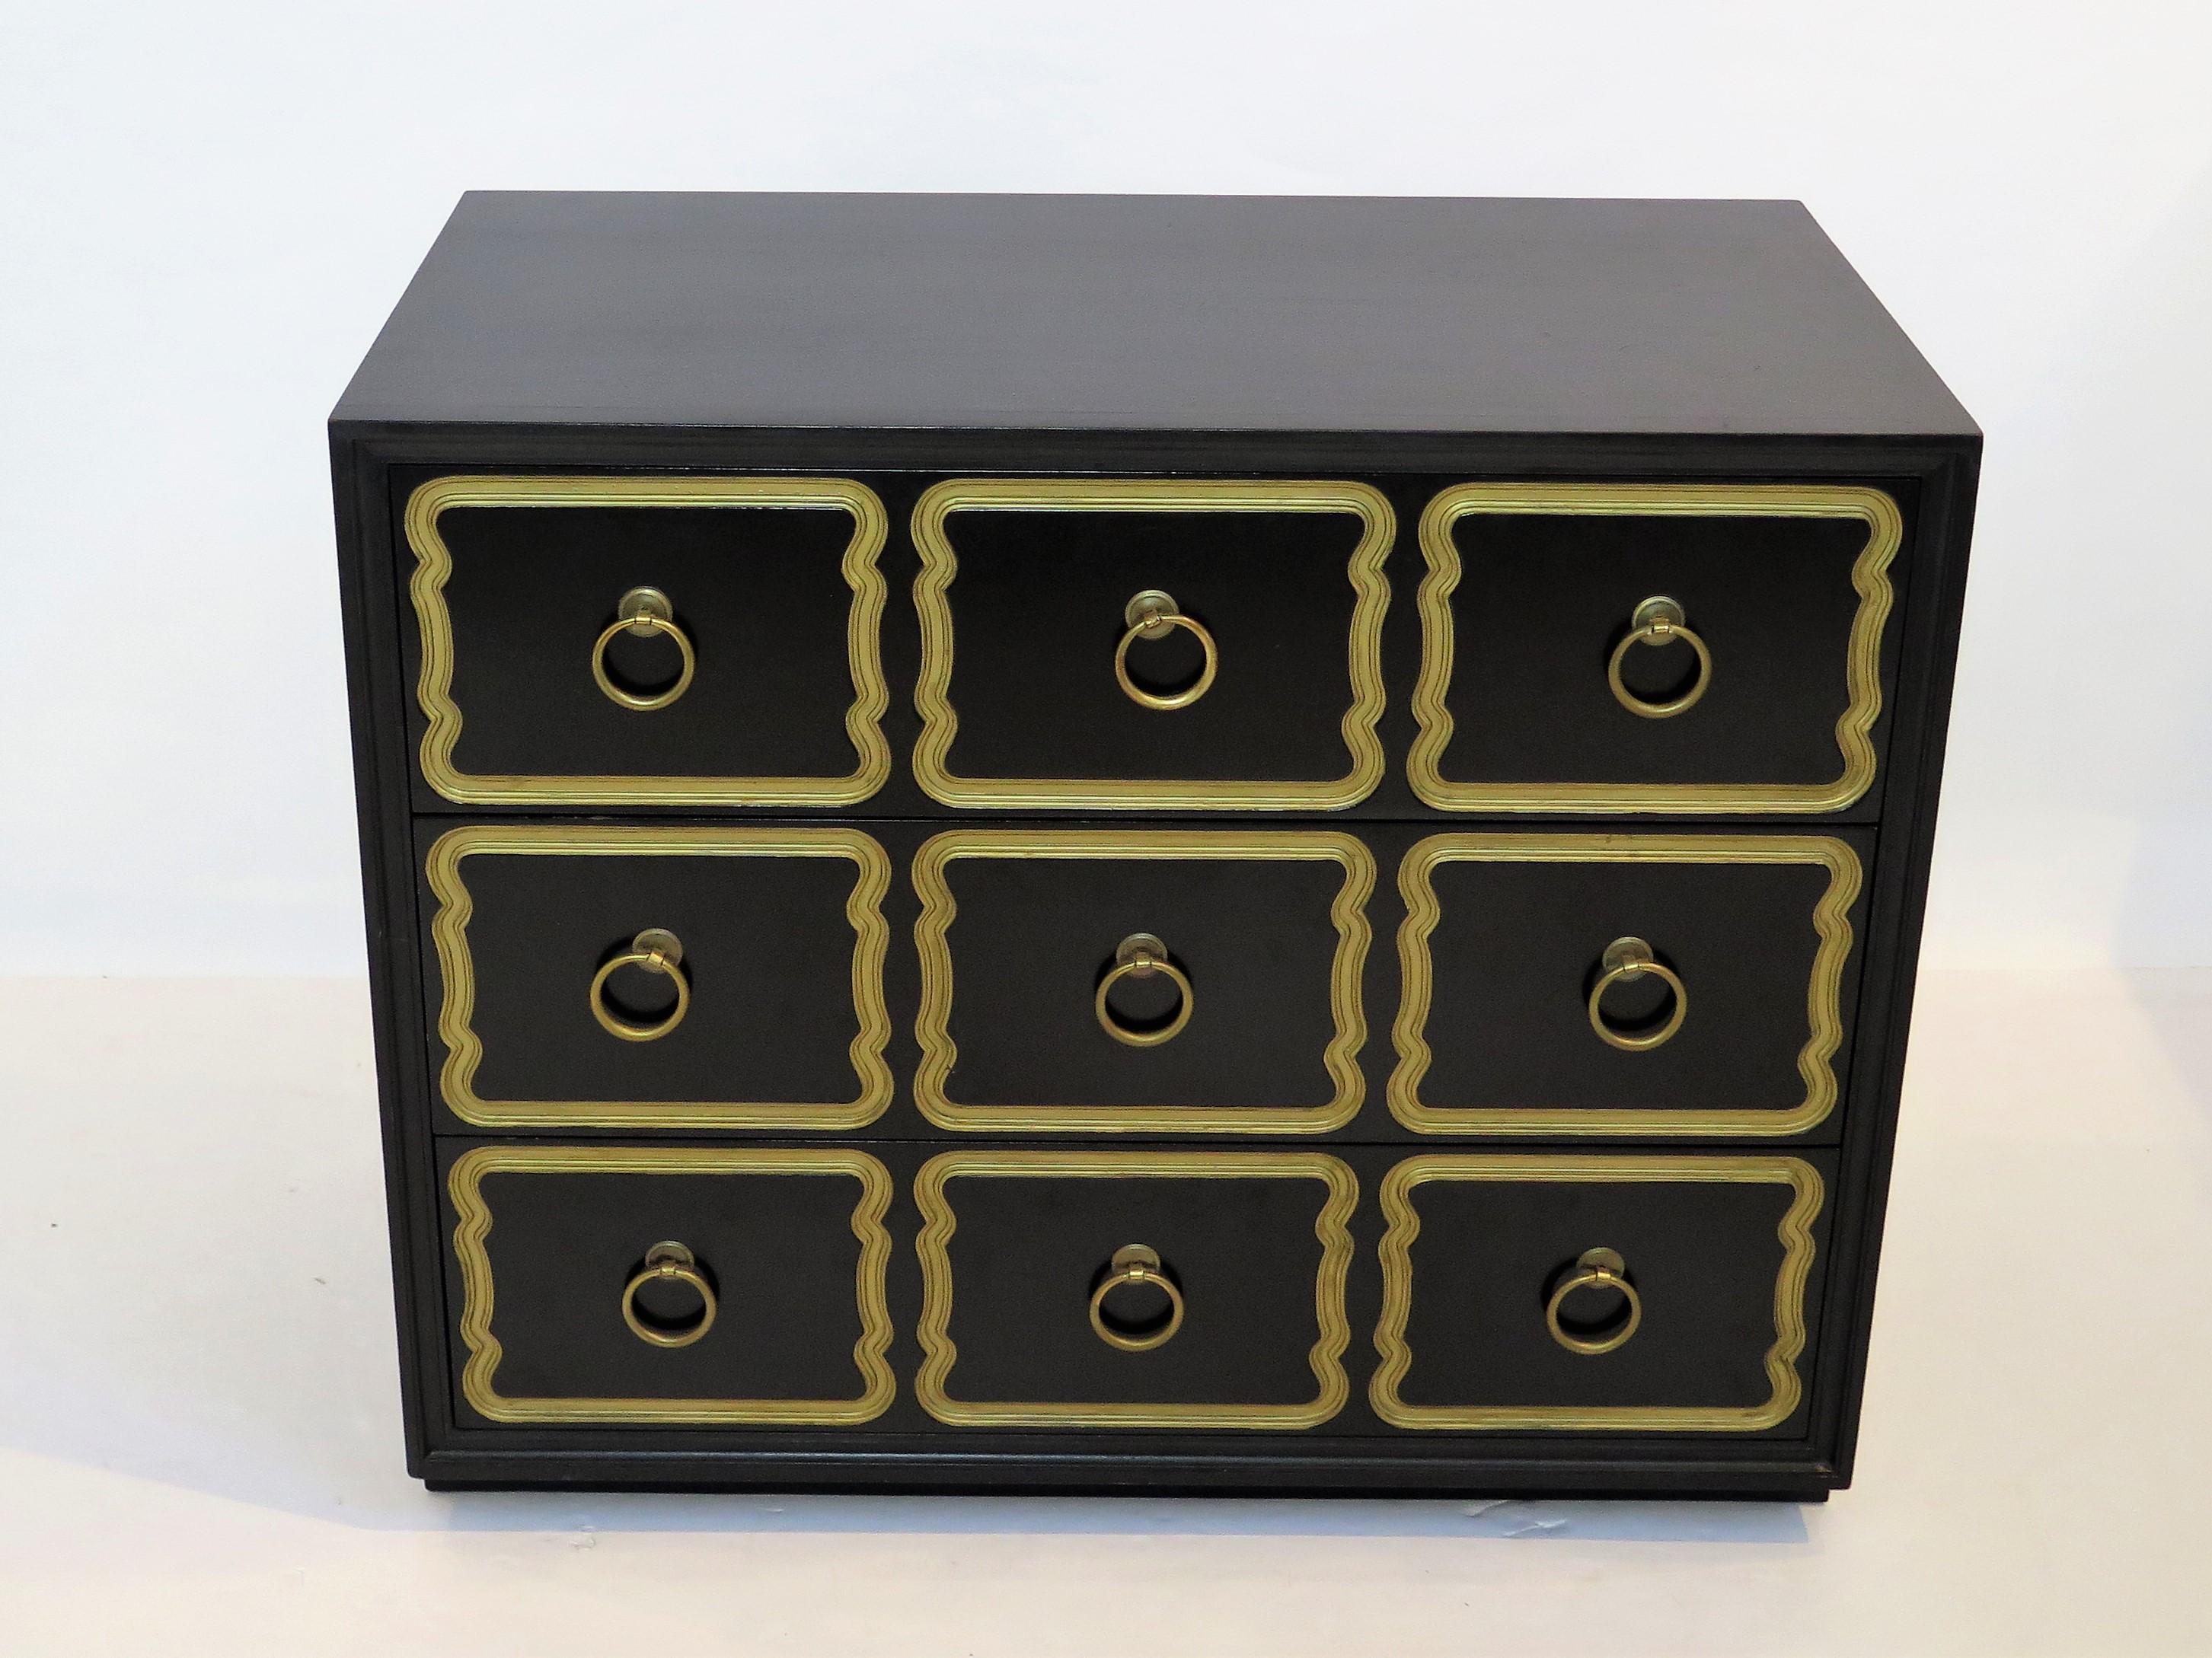 Authentic Espana chest in traditional black bean color designed by Dorothy Draper for Henredon. This Hollywood Regency three drawer chest has incised design and gold accents with original brass pulls. The chest also includes the original top drawer